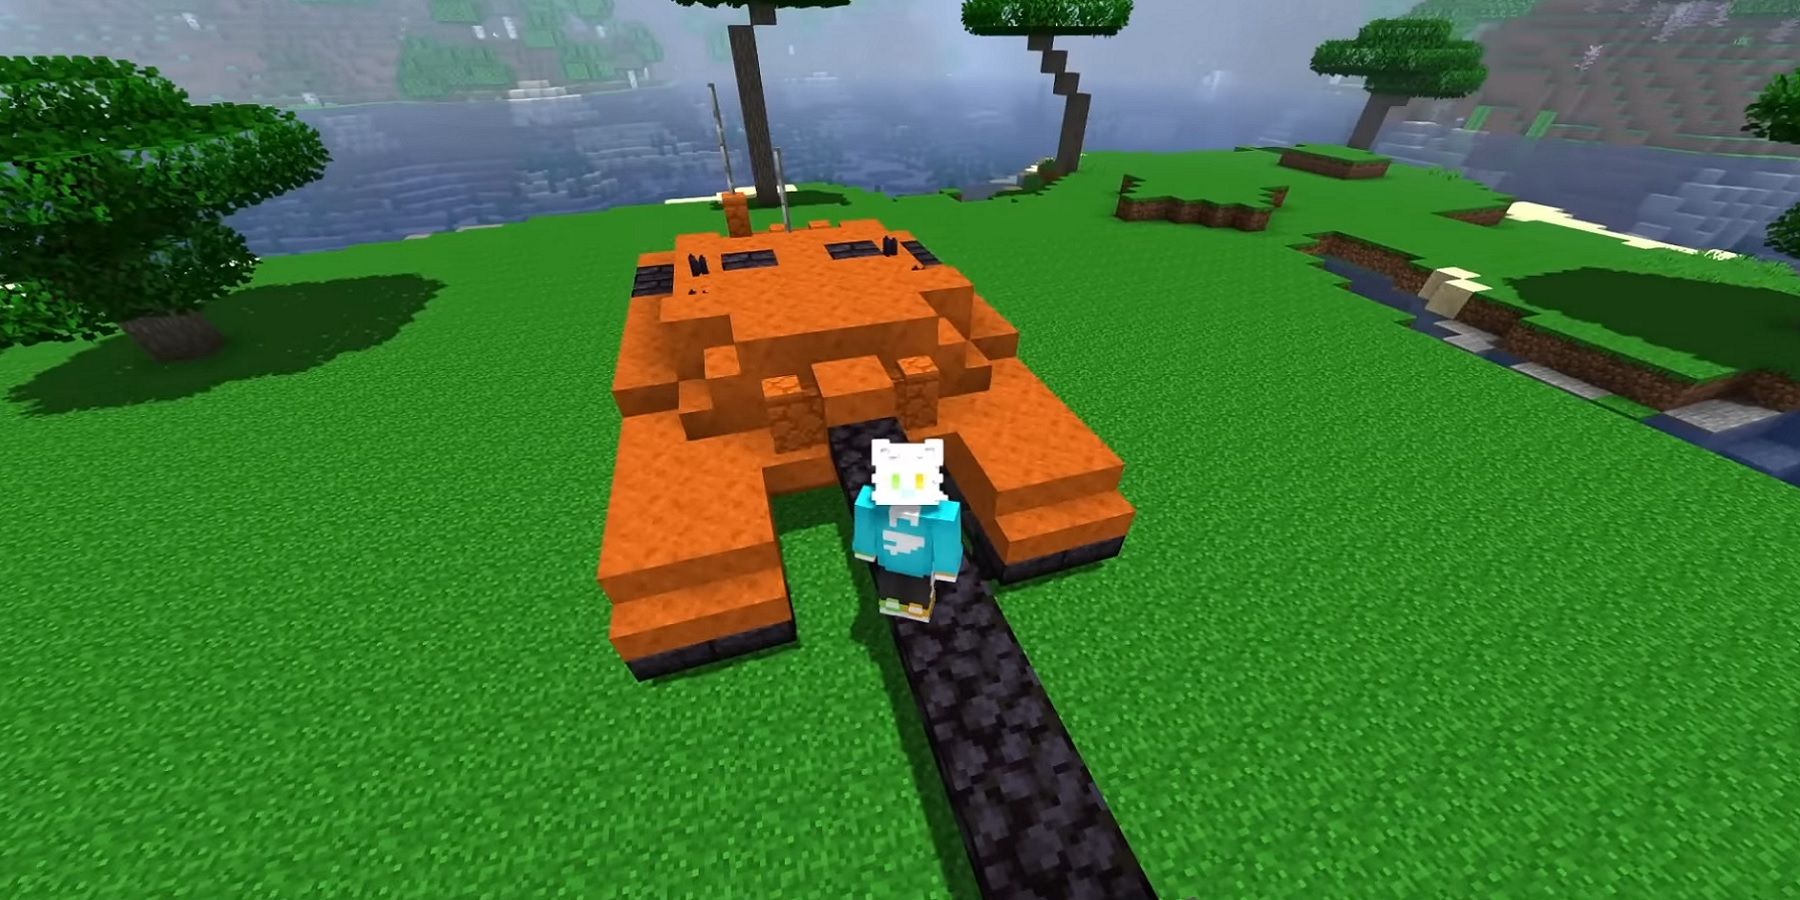 Image from Minecraft showing the player hovering above an orange tank.